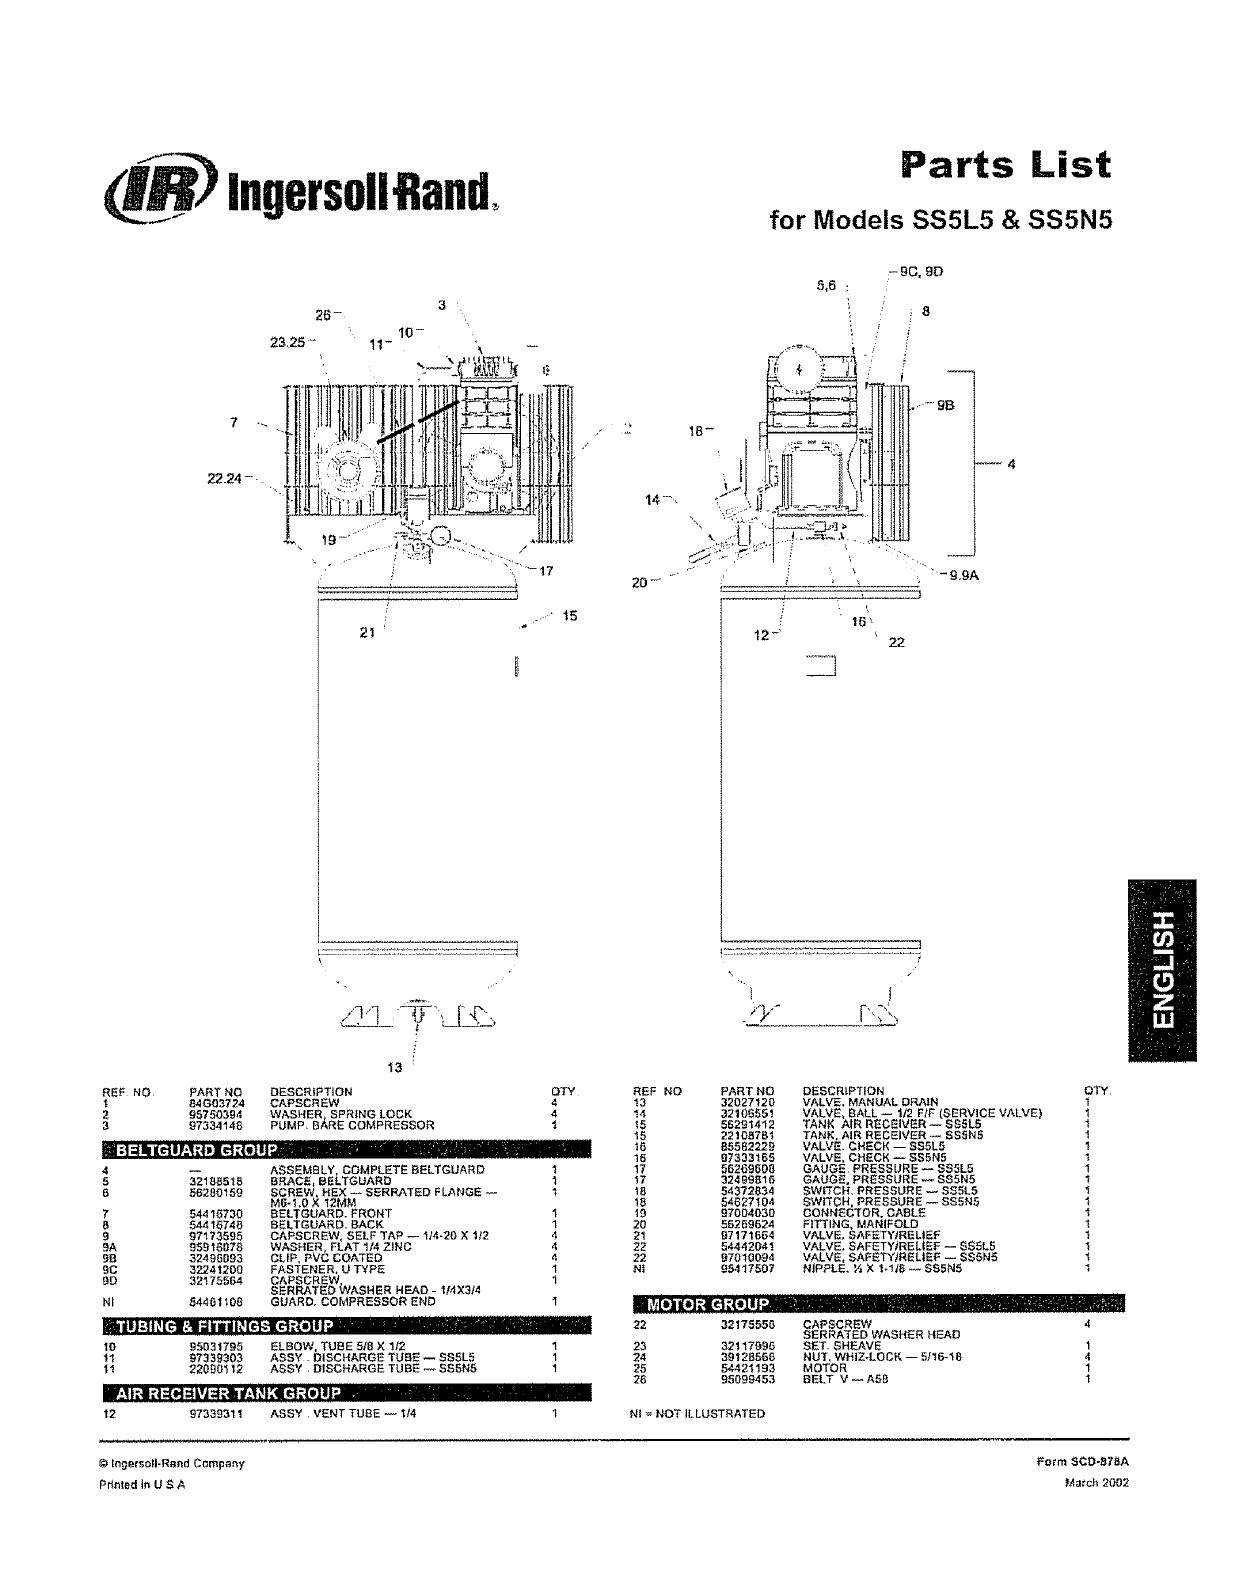 Wiring Diagram  30 Ingersoll Rand Ss3 Parts Diagram